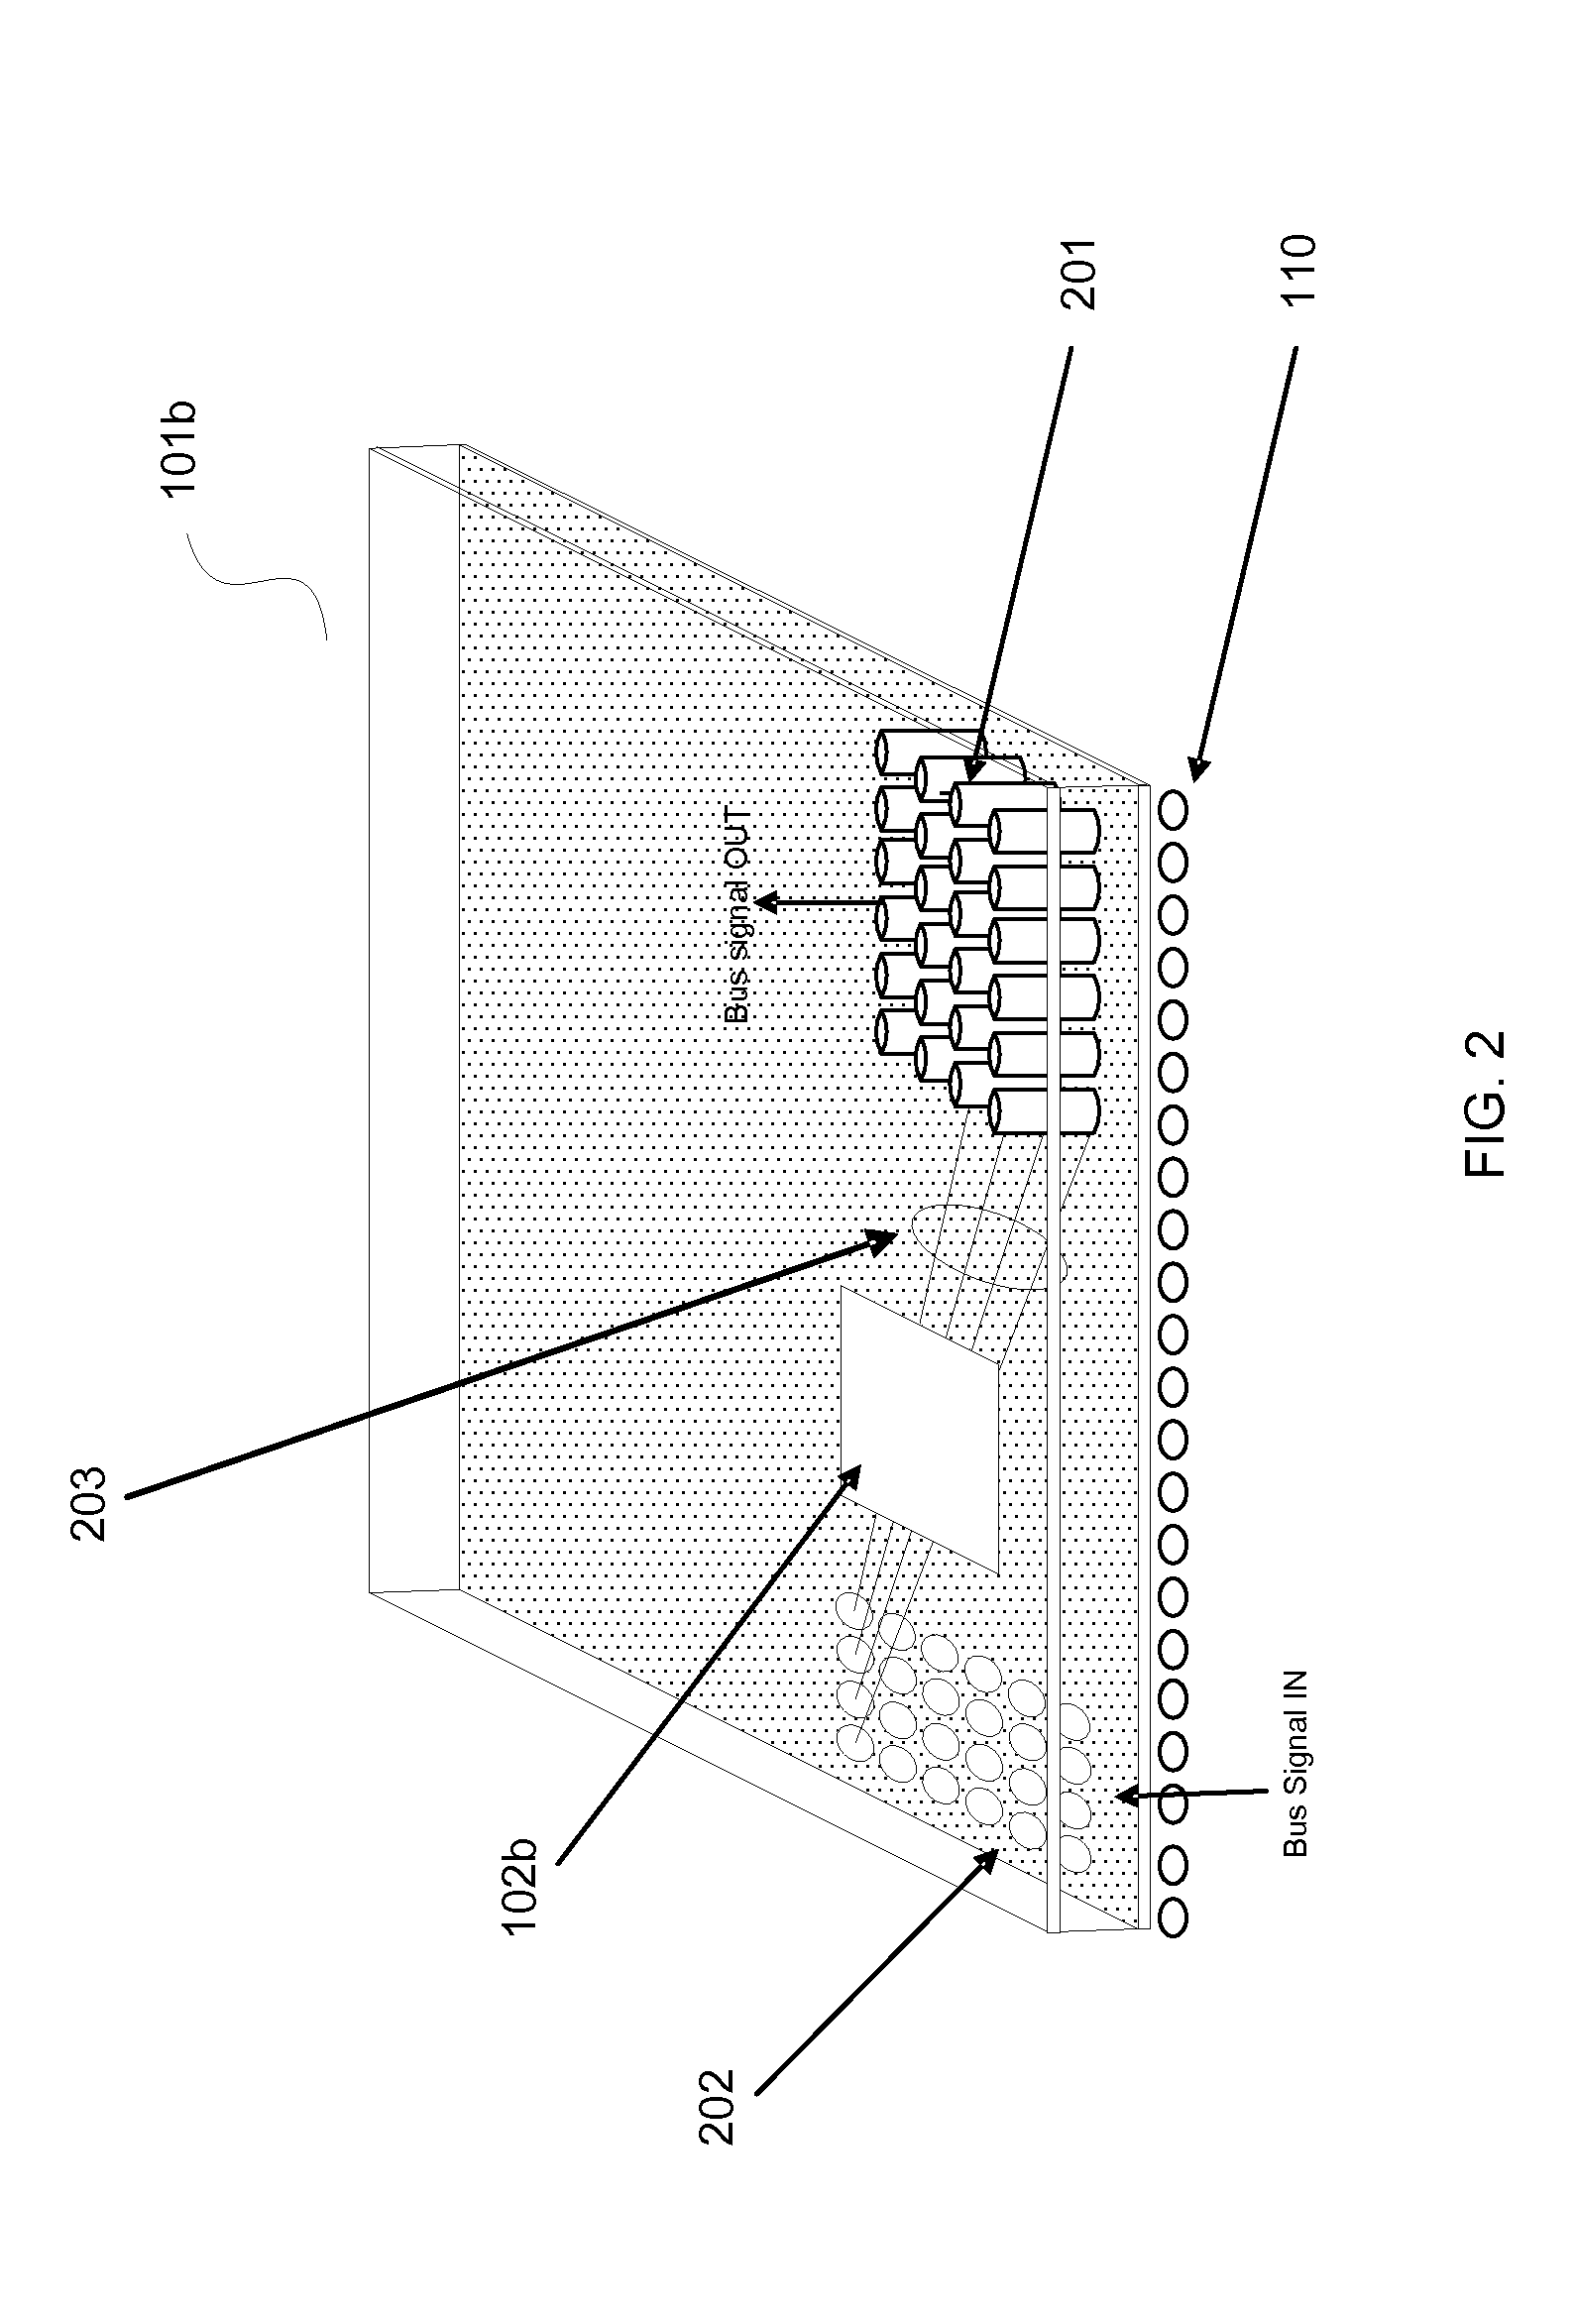 System and Method for Thermal Optimized Chip Stacking